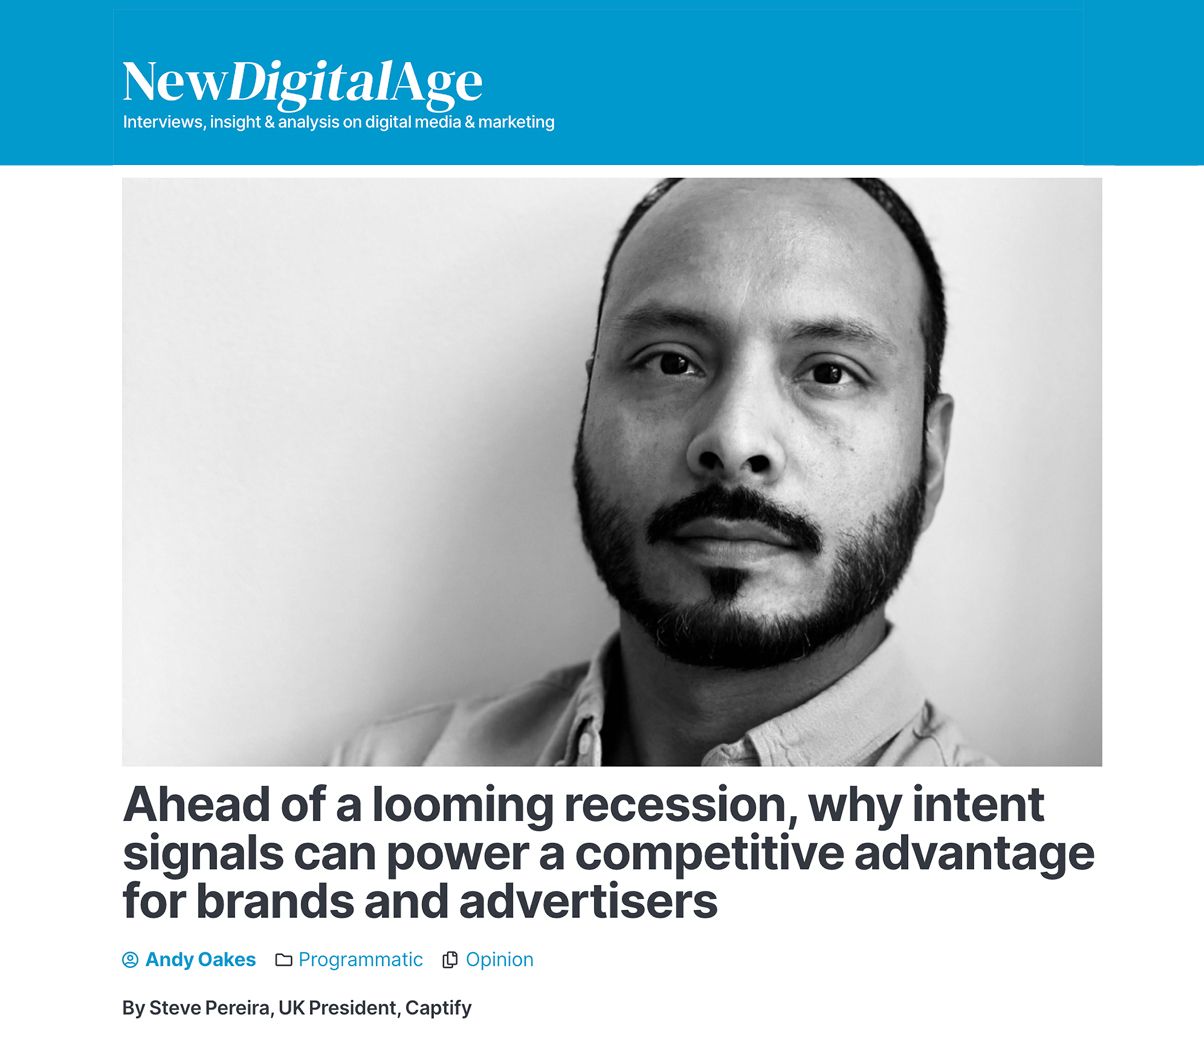 NewDigitalAge: Ahead Of A Looming Recession, Why Intent Signals Can Power A Competitive Advantage For Brands And Advertisers